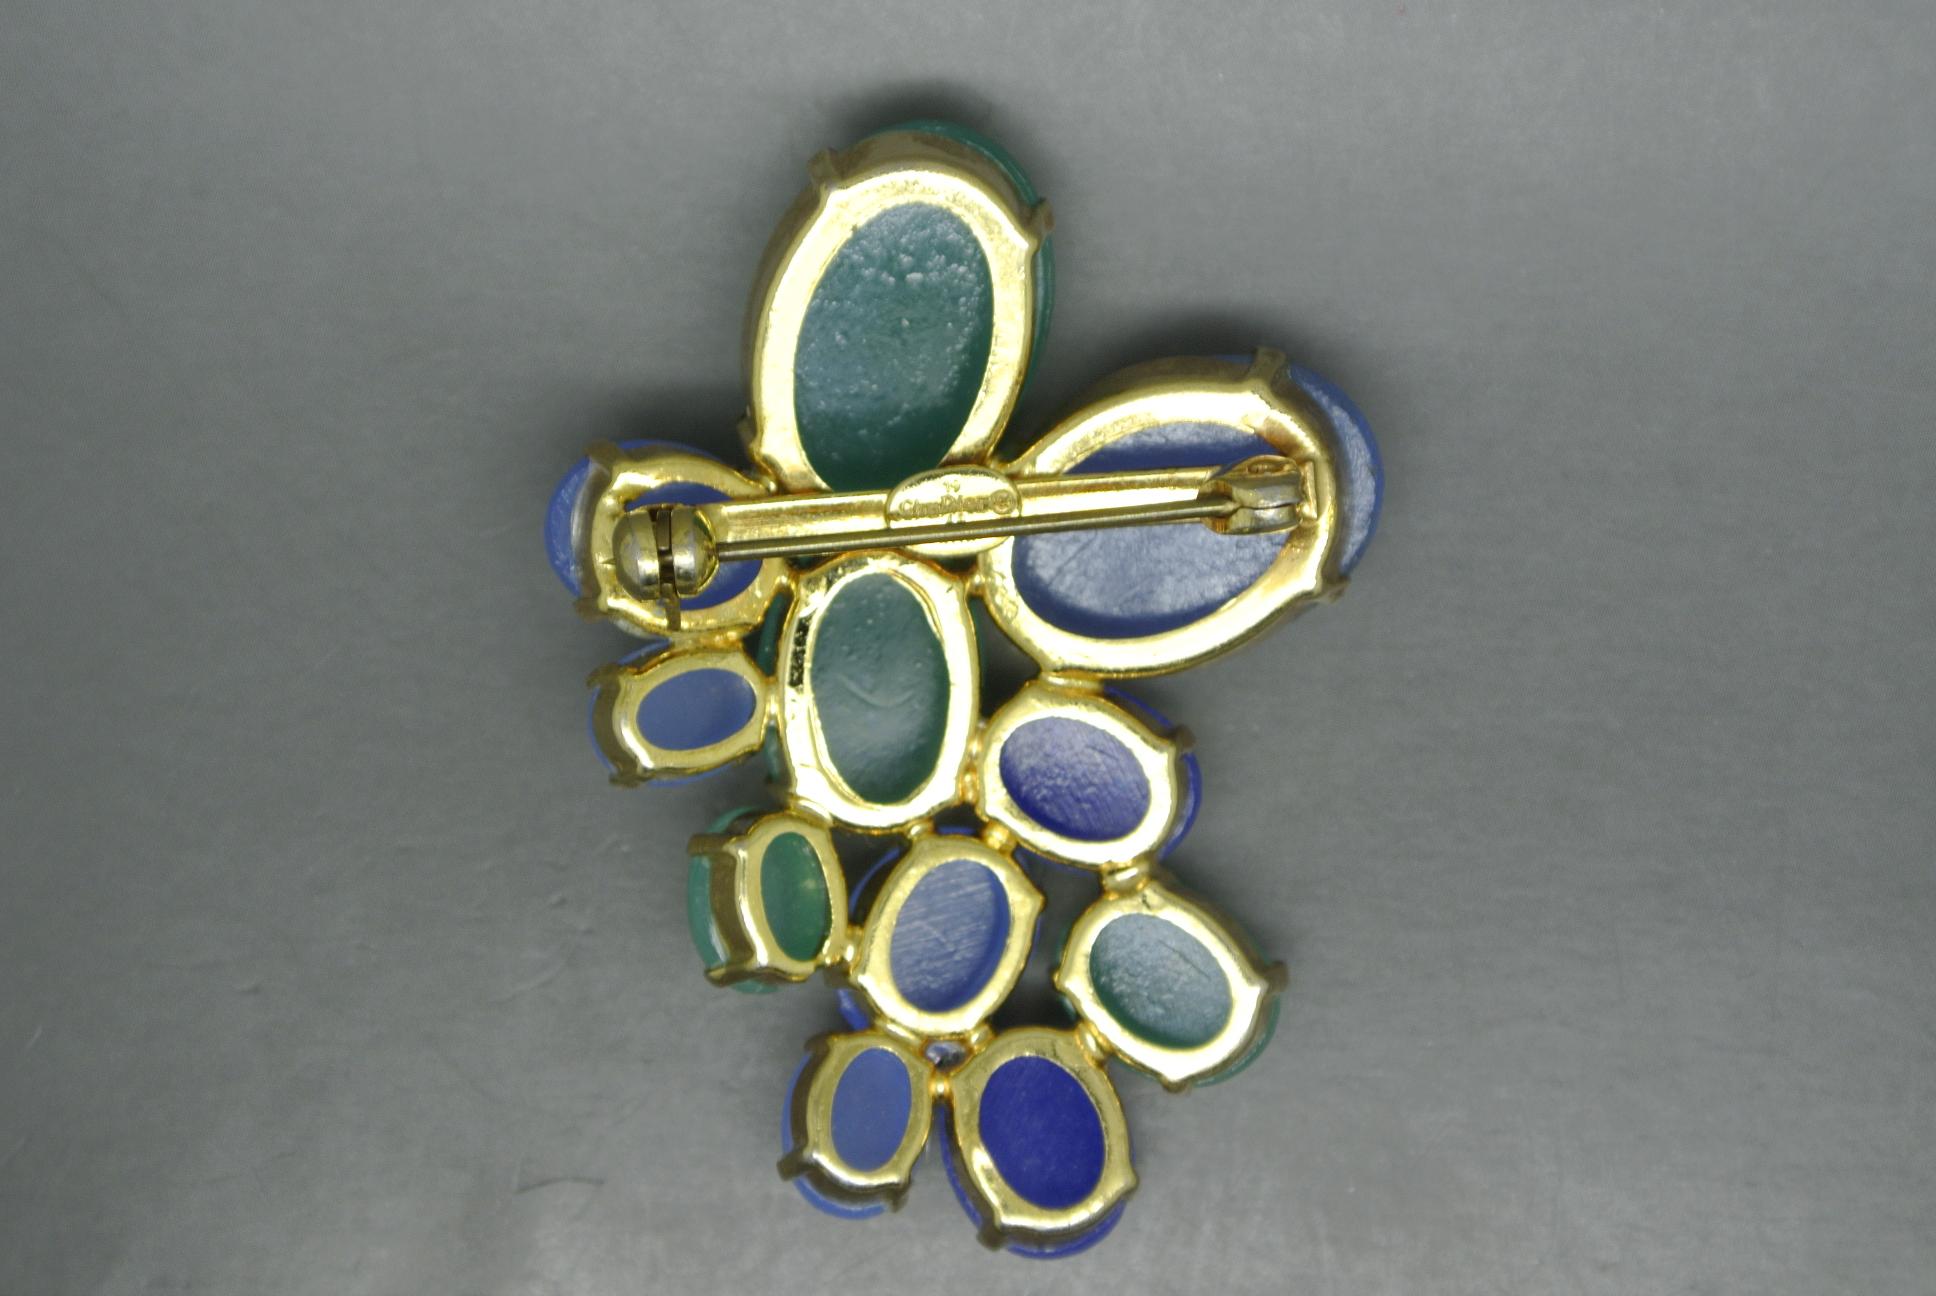 Christian Dior Brooch
signed and dated 1968
Made by Henkel&Grosse Company